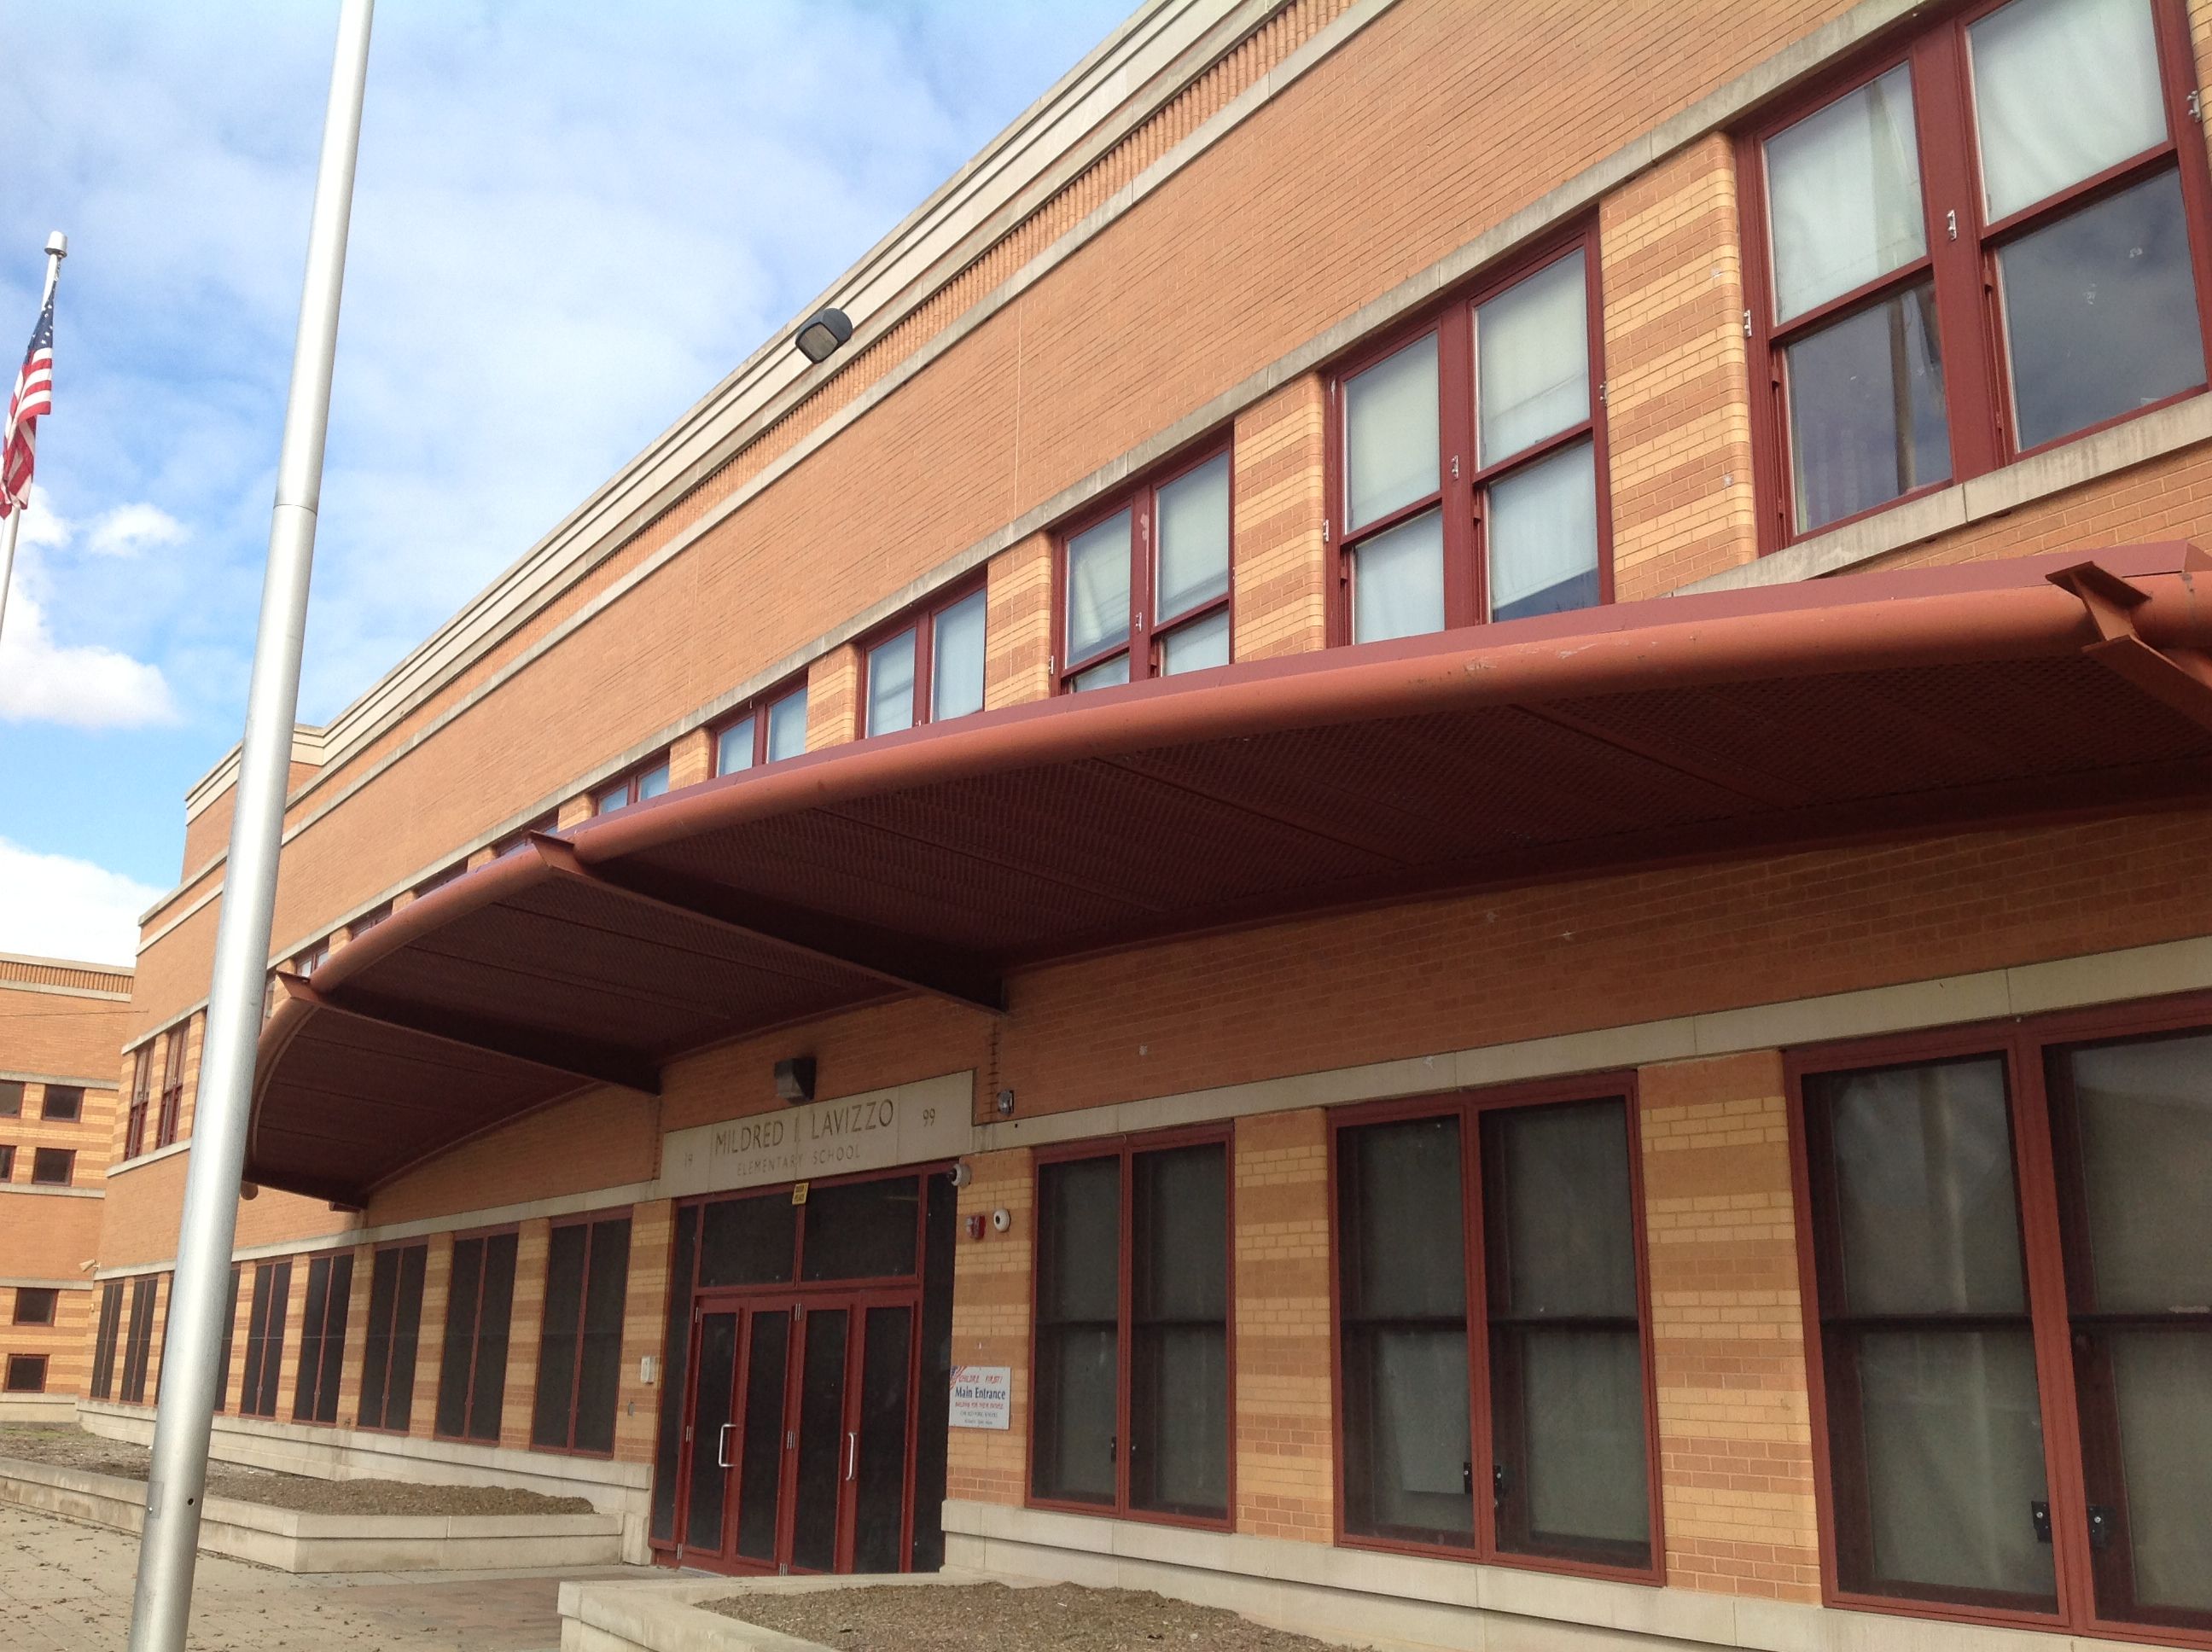 featured image Mildred I Lavizzo Elementary School